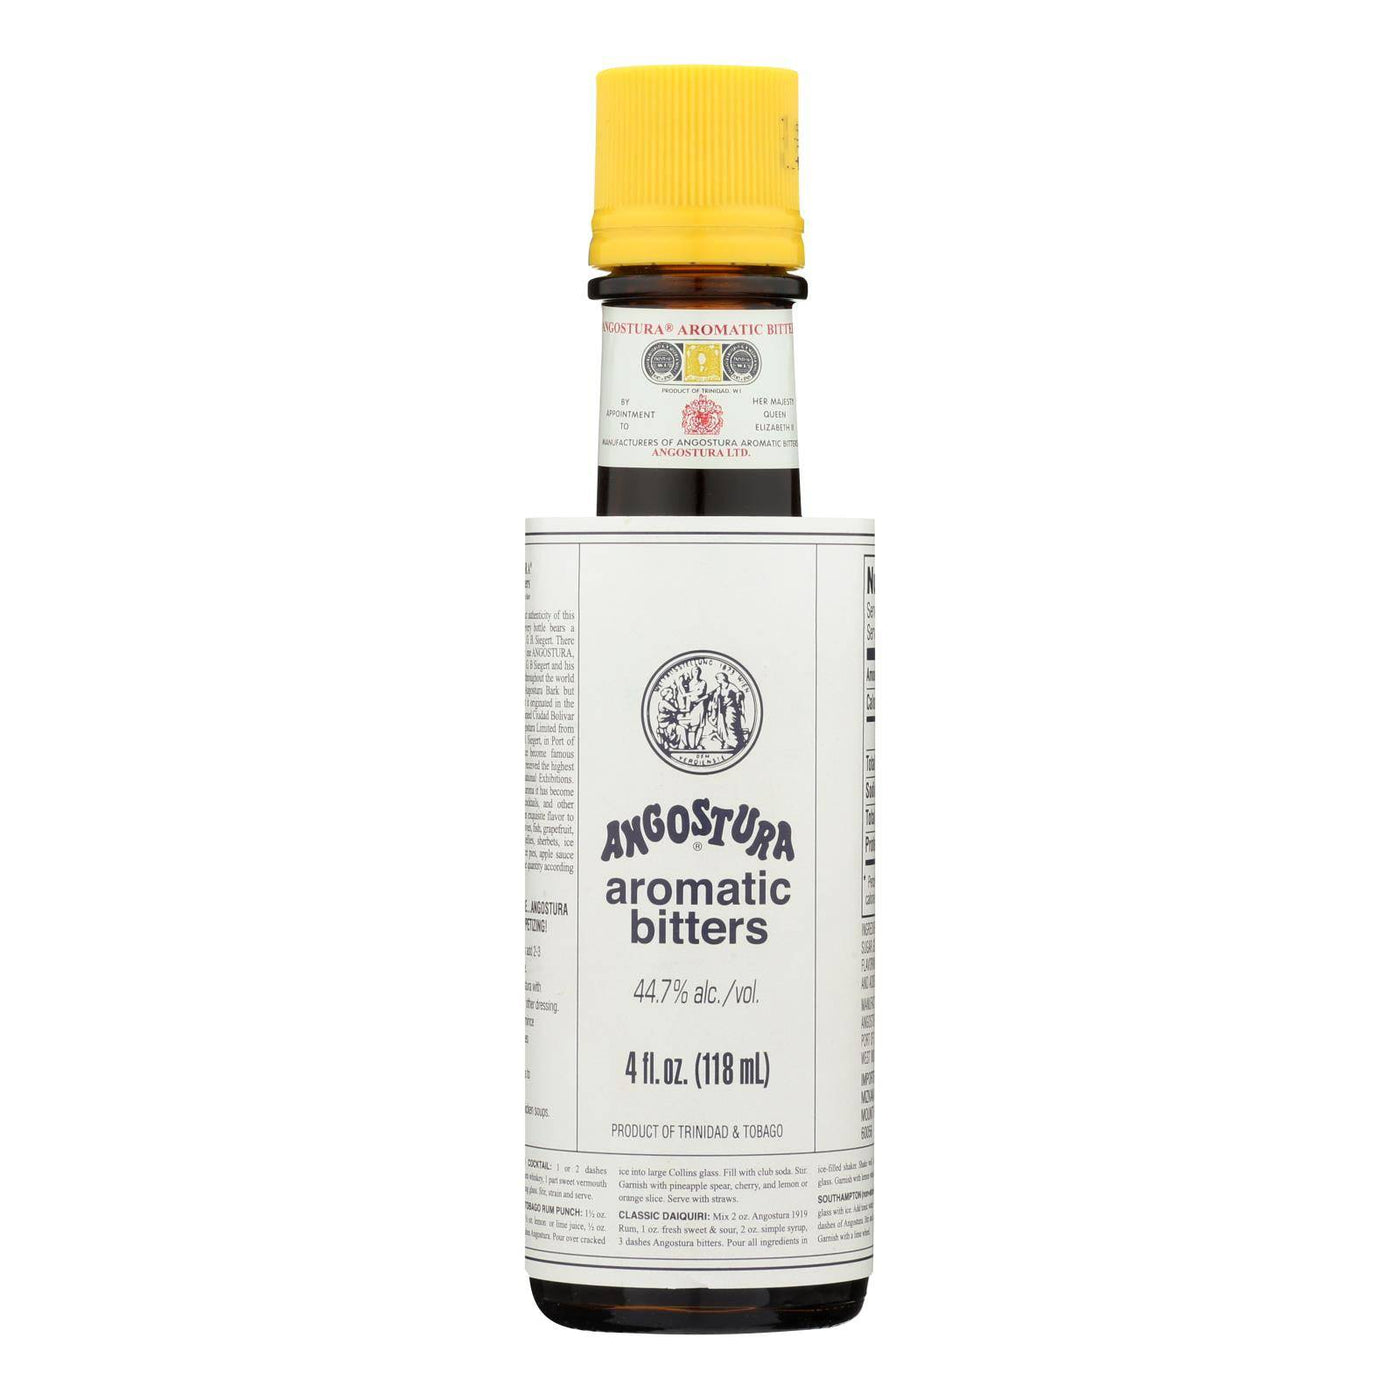 Angostura Aromatic Bitters - Case Of 12 - 4 Fl Oz. | OnlyNaturals.us